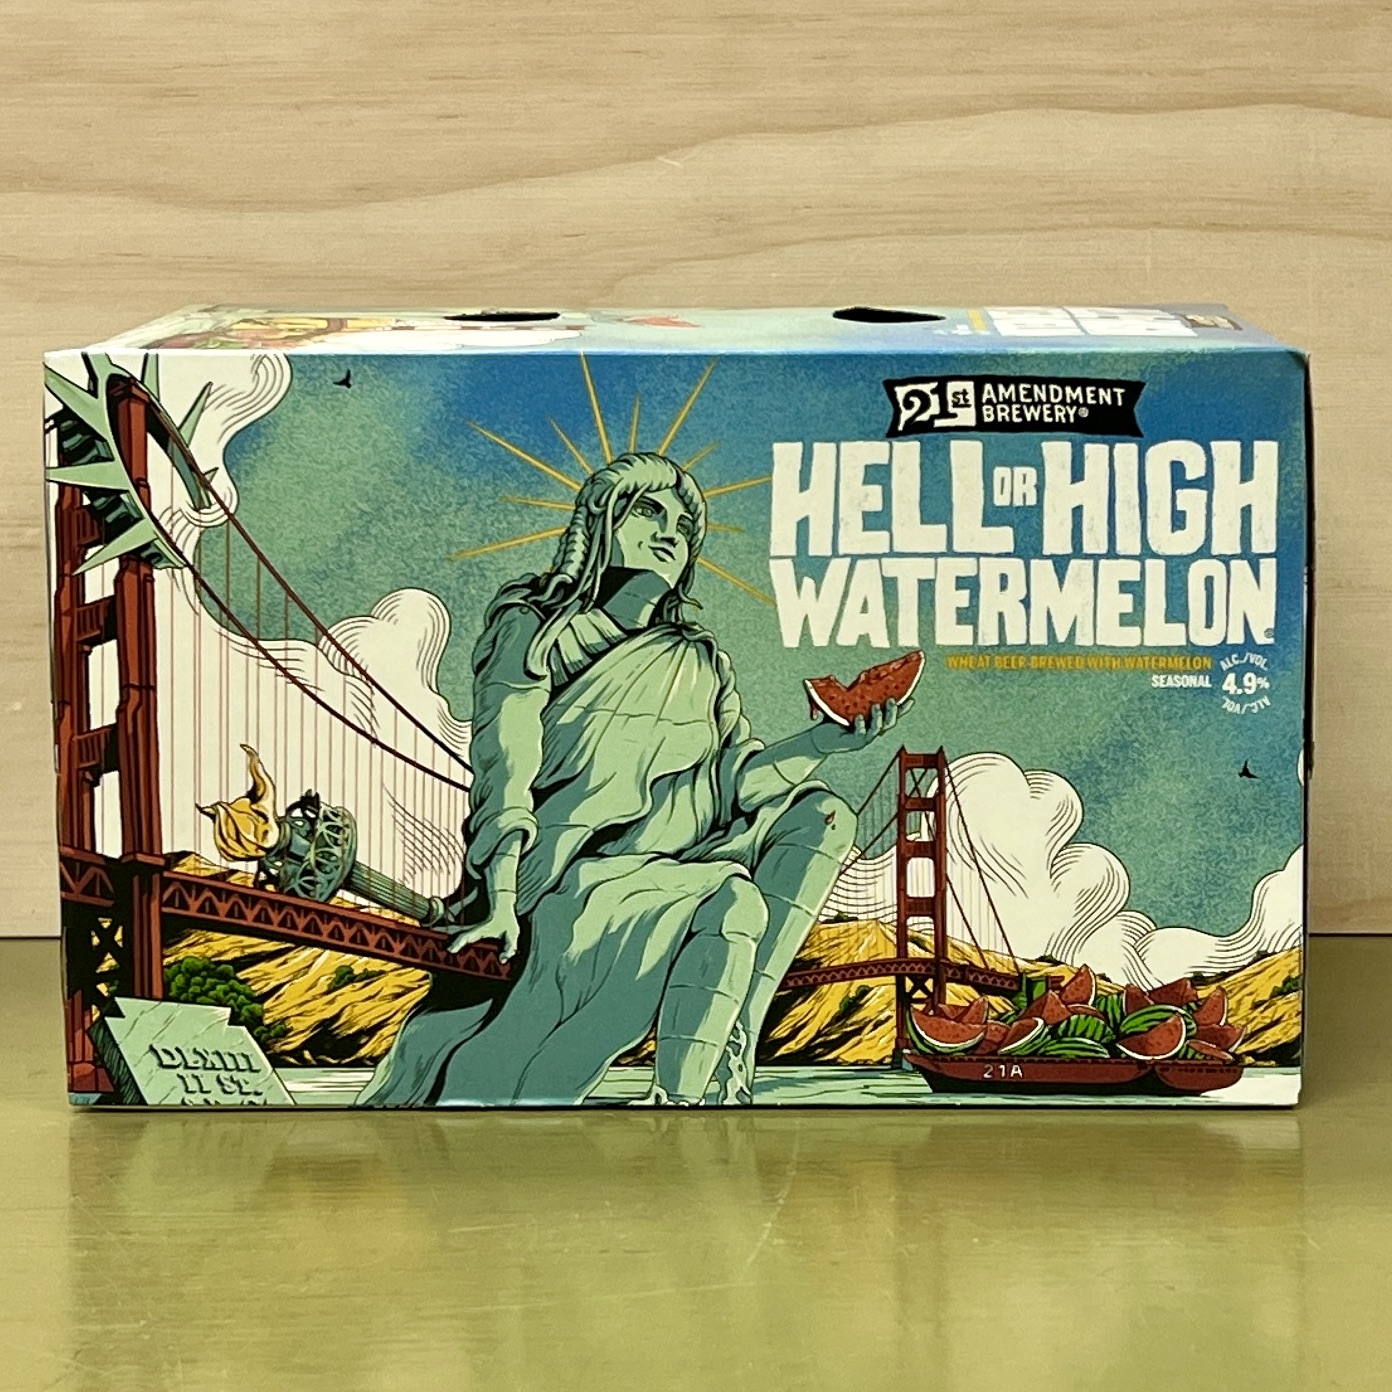 21st Ammendment Hell or High Watermelon Wheat Beer 6 x 12oz cans